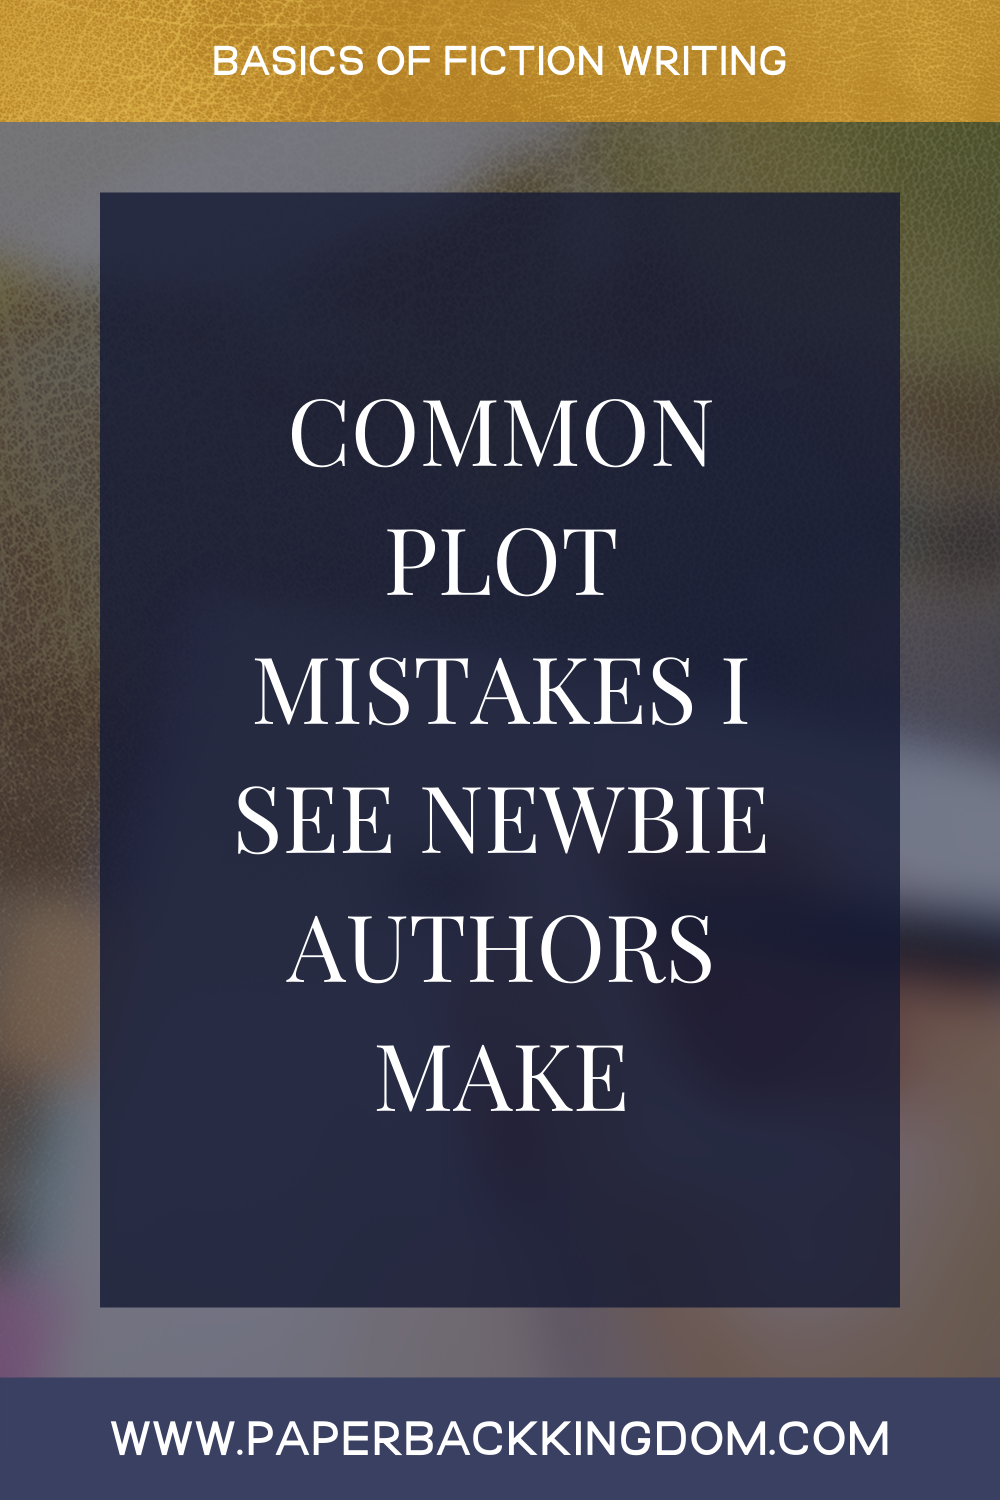 Common Plot Mistakes I See Newbie Writers Make - There’s a lot of writing advice out there, but the way you’re going to be able to write your best book is to cut through the noise and *just* focus on what you need to know to get a good first draft down and polish it to perfection. My goal with this blog series is that you’ll walk away with an understanding of the most common mistakes new authors are making, and how to avoid them—and this is based on things I’ve seen time and time again after coaching authors and teaching state-wide workshops in schools for the past five years. So today, we’re going to go over three common mistakes I see being made with plot, and how you can navigate these challenges.